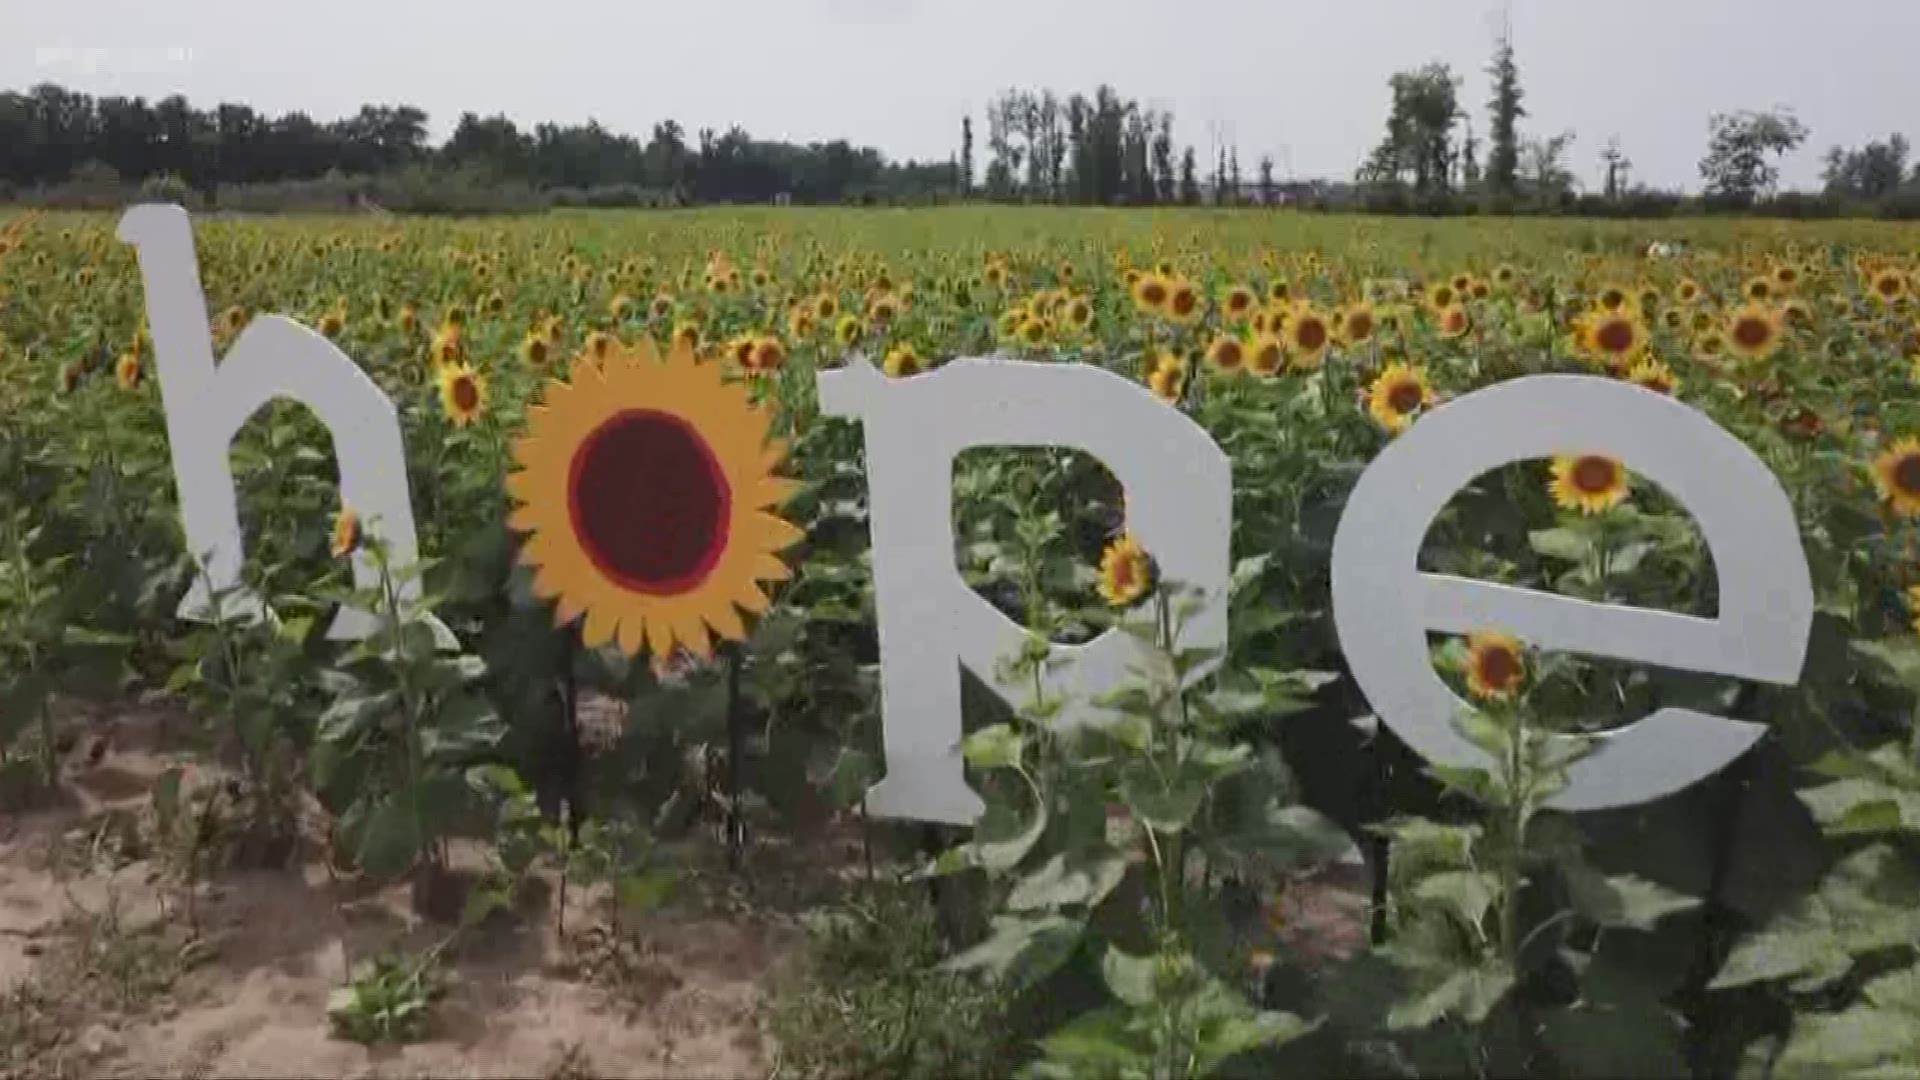 Maria's Field of Hope blooms despite construction nearby